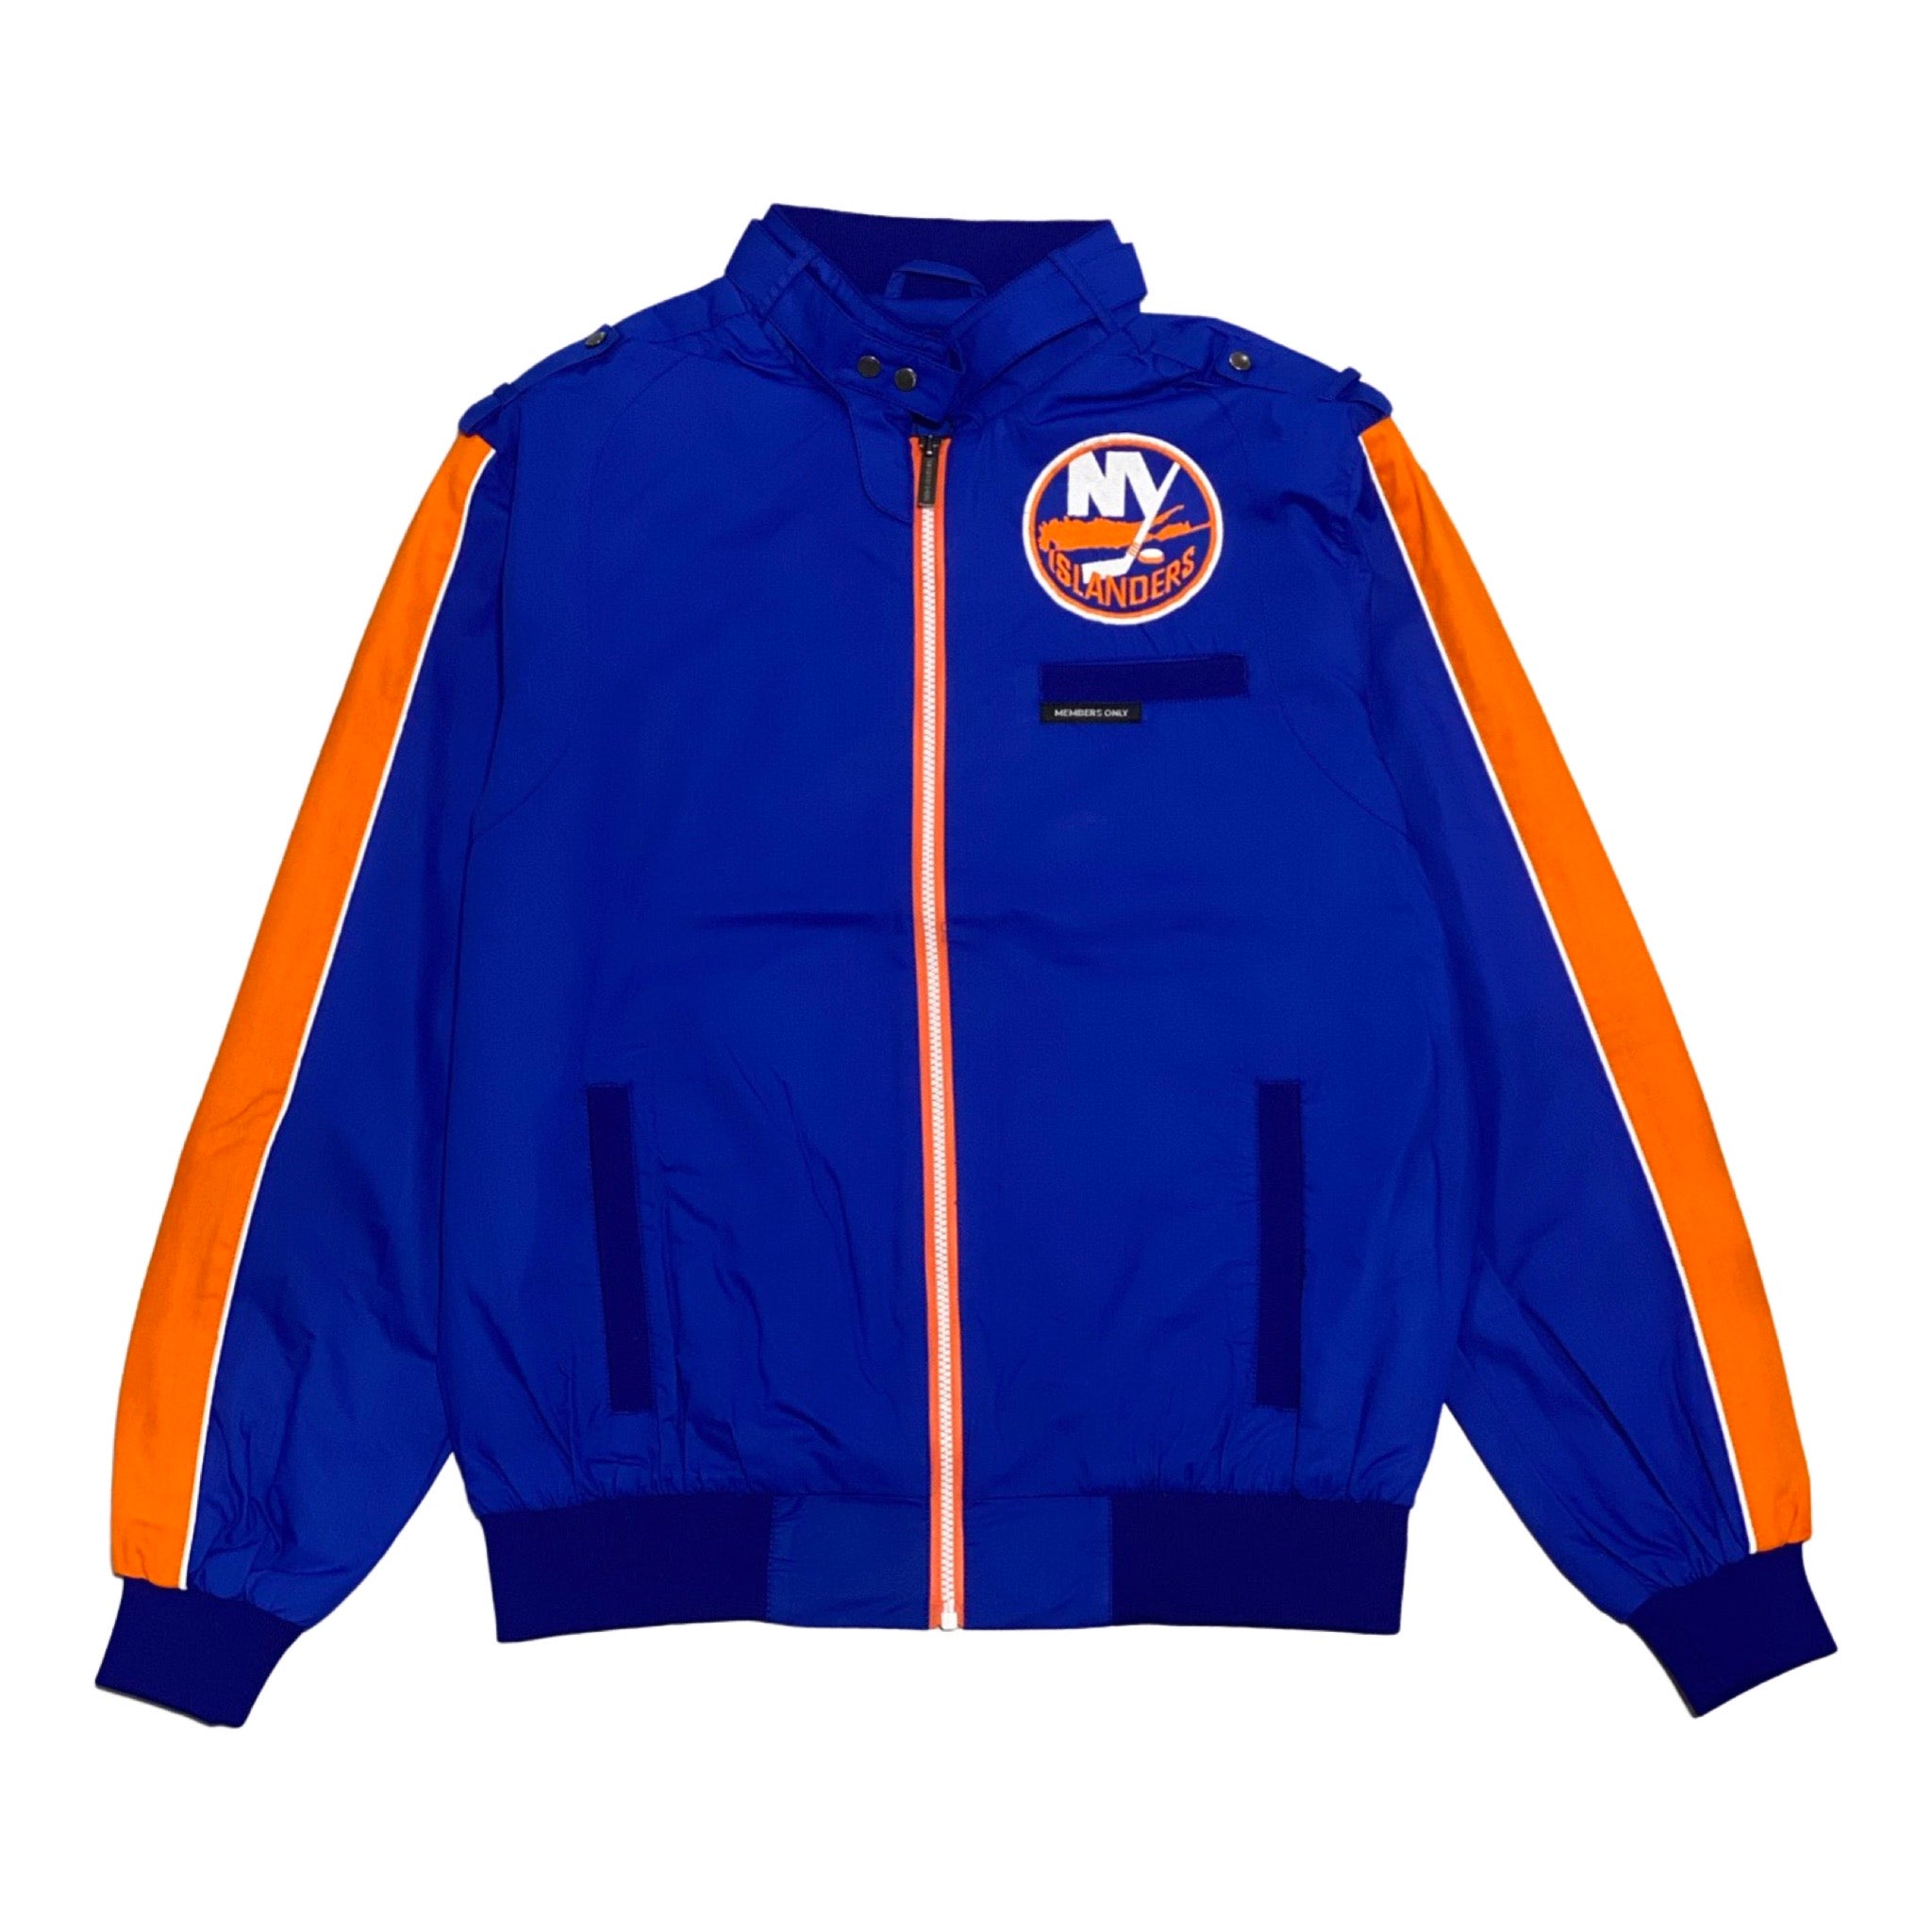 Official New York Islanders Women's Collection, Isles Lab